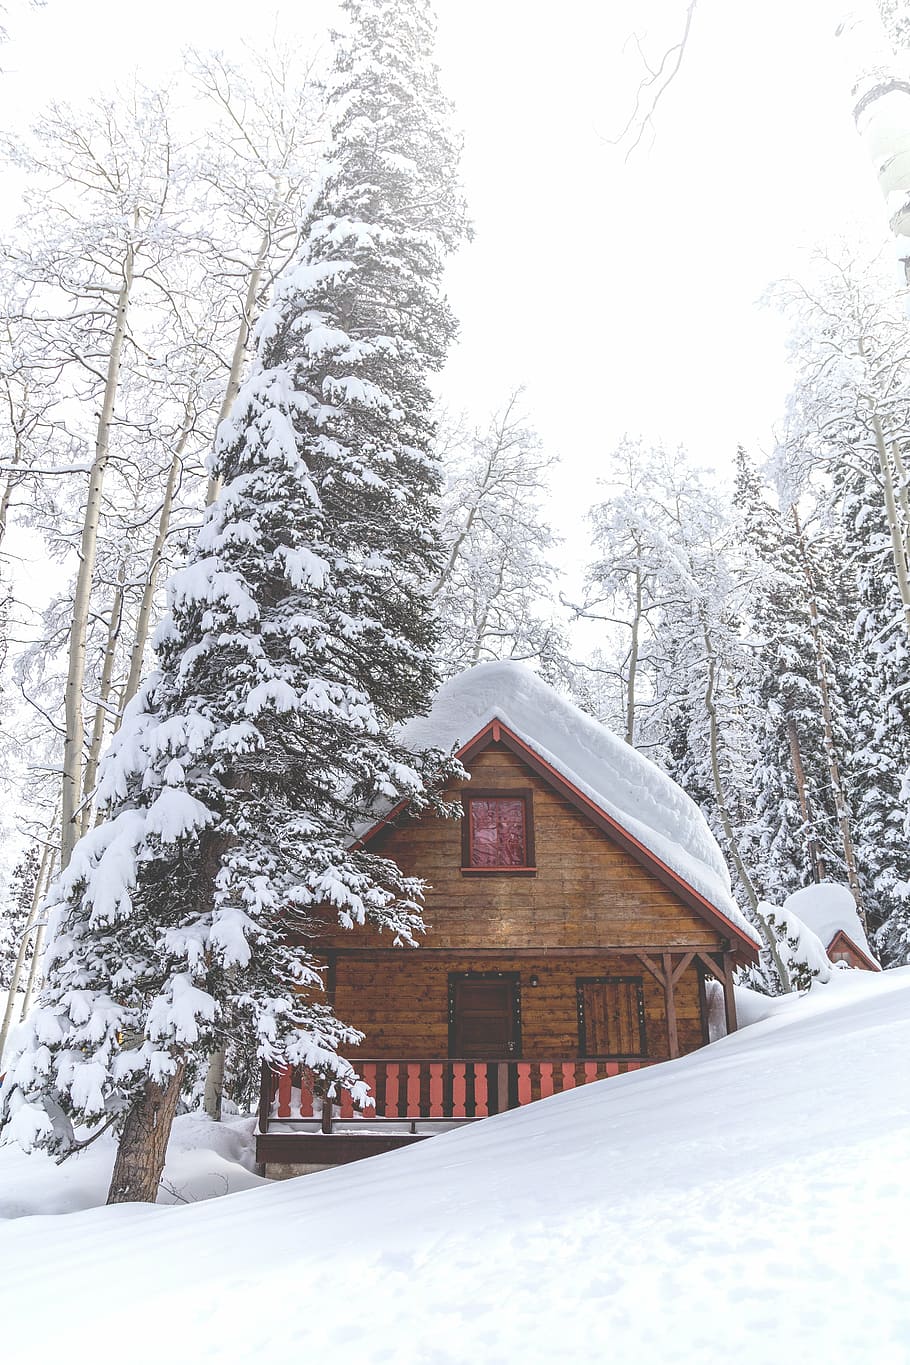 brown, red, house, surrounded, high, trees, covered, snow, white, sky